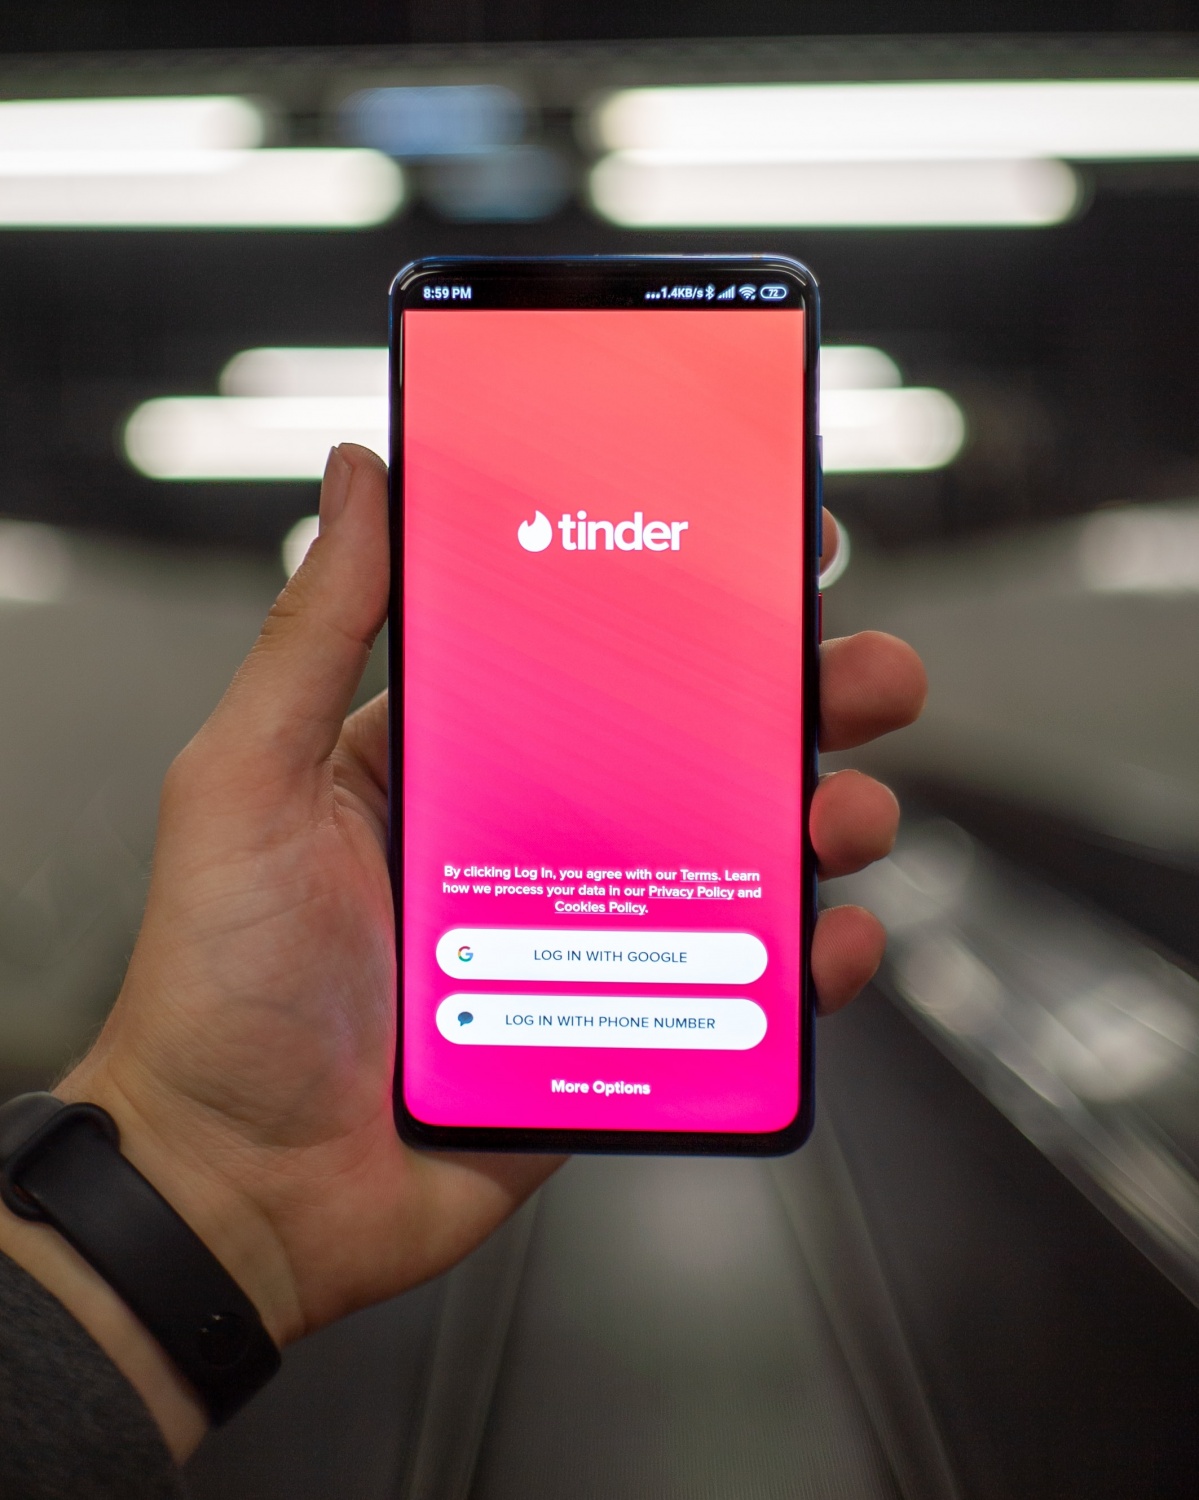 Tinder Could Start Asking Users for Government ID Verification to Promote User Safety